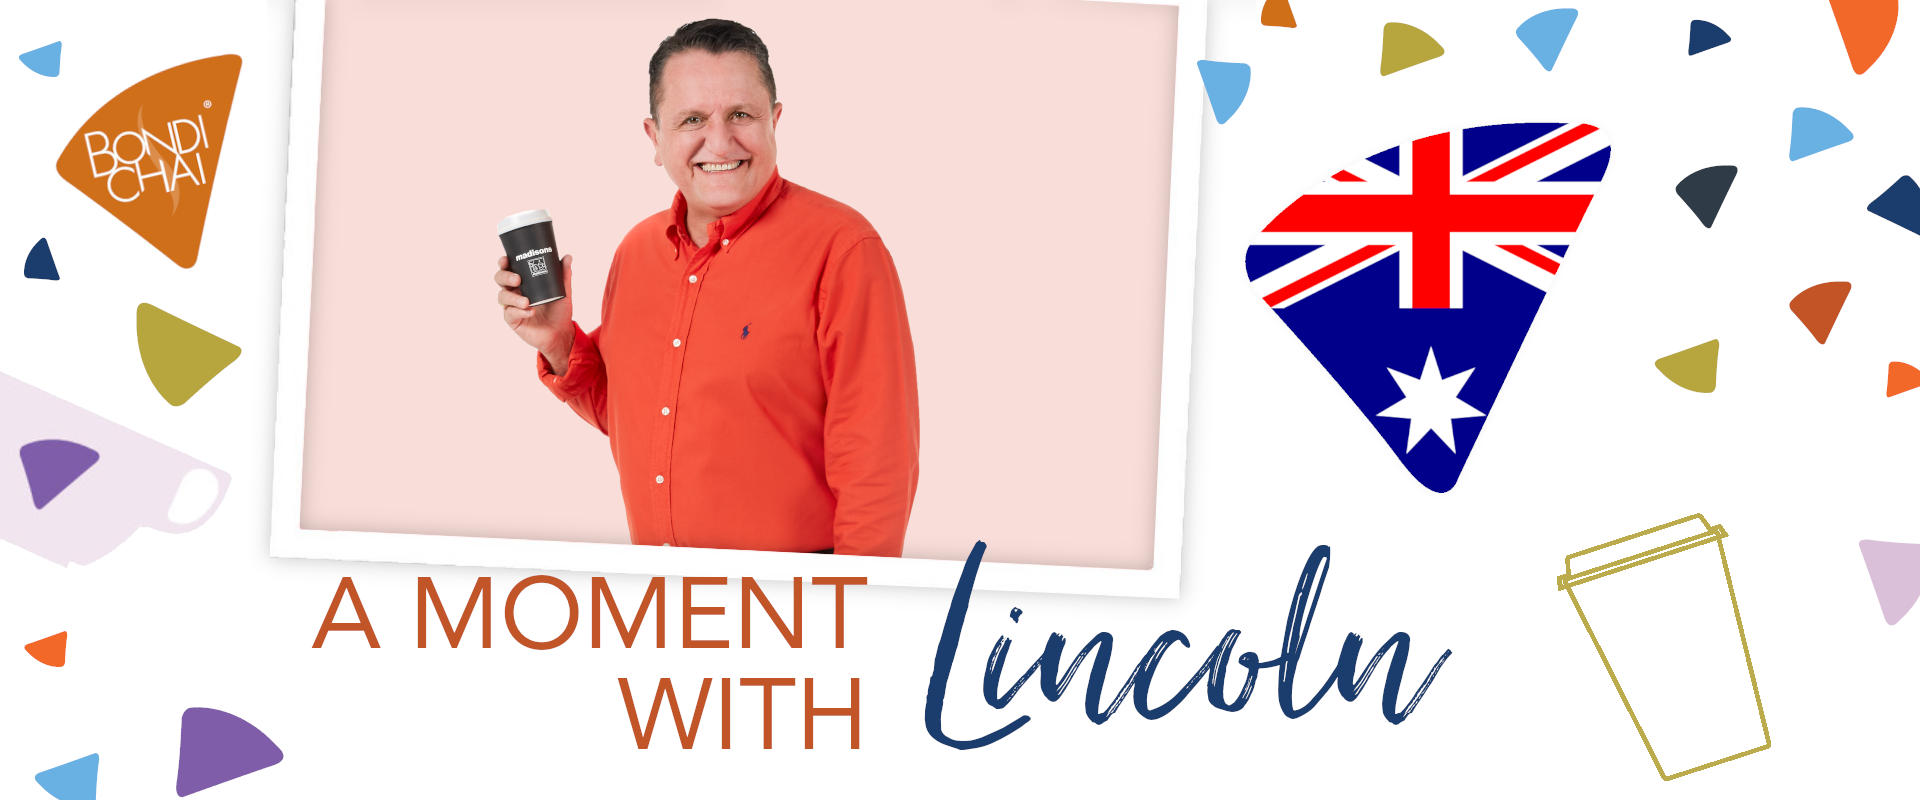 bondi-chai-a-moment-with-lincoln-madisons-cafe